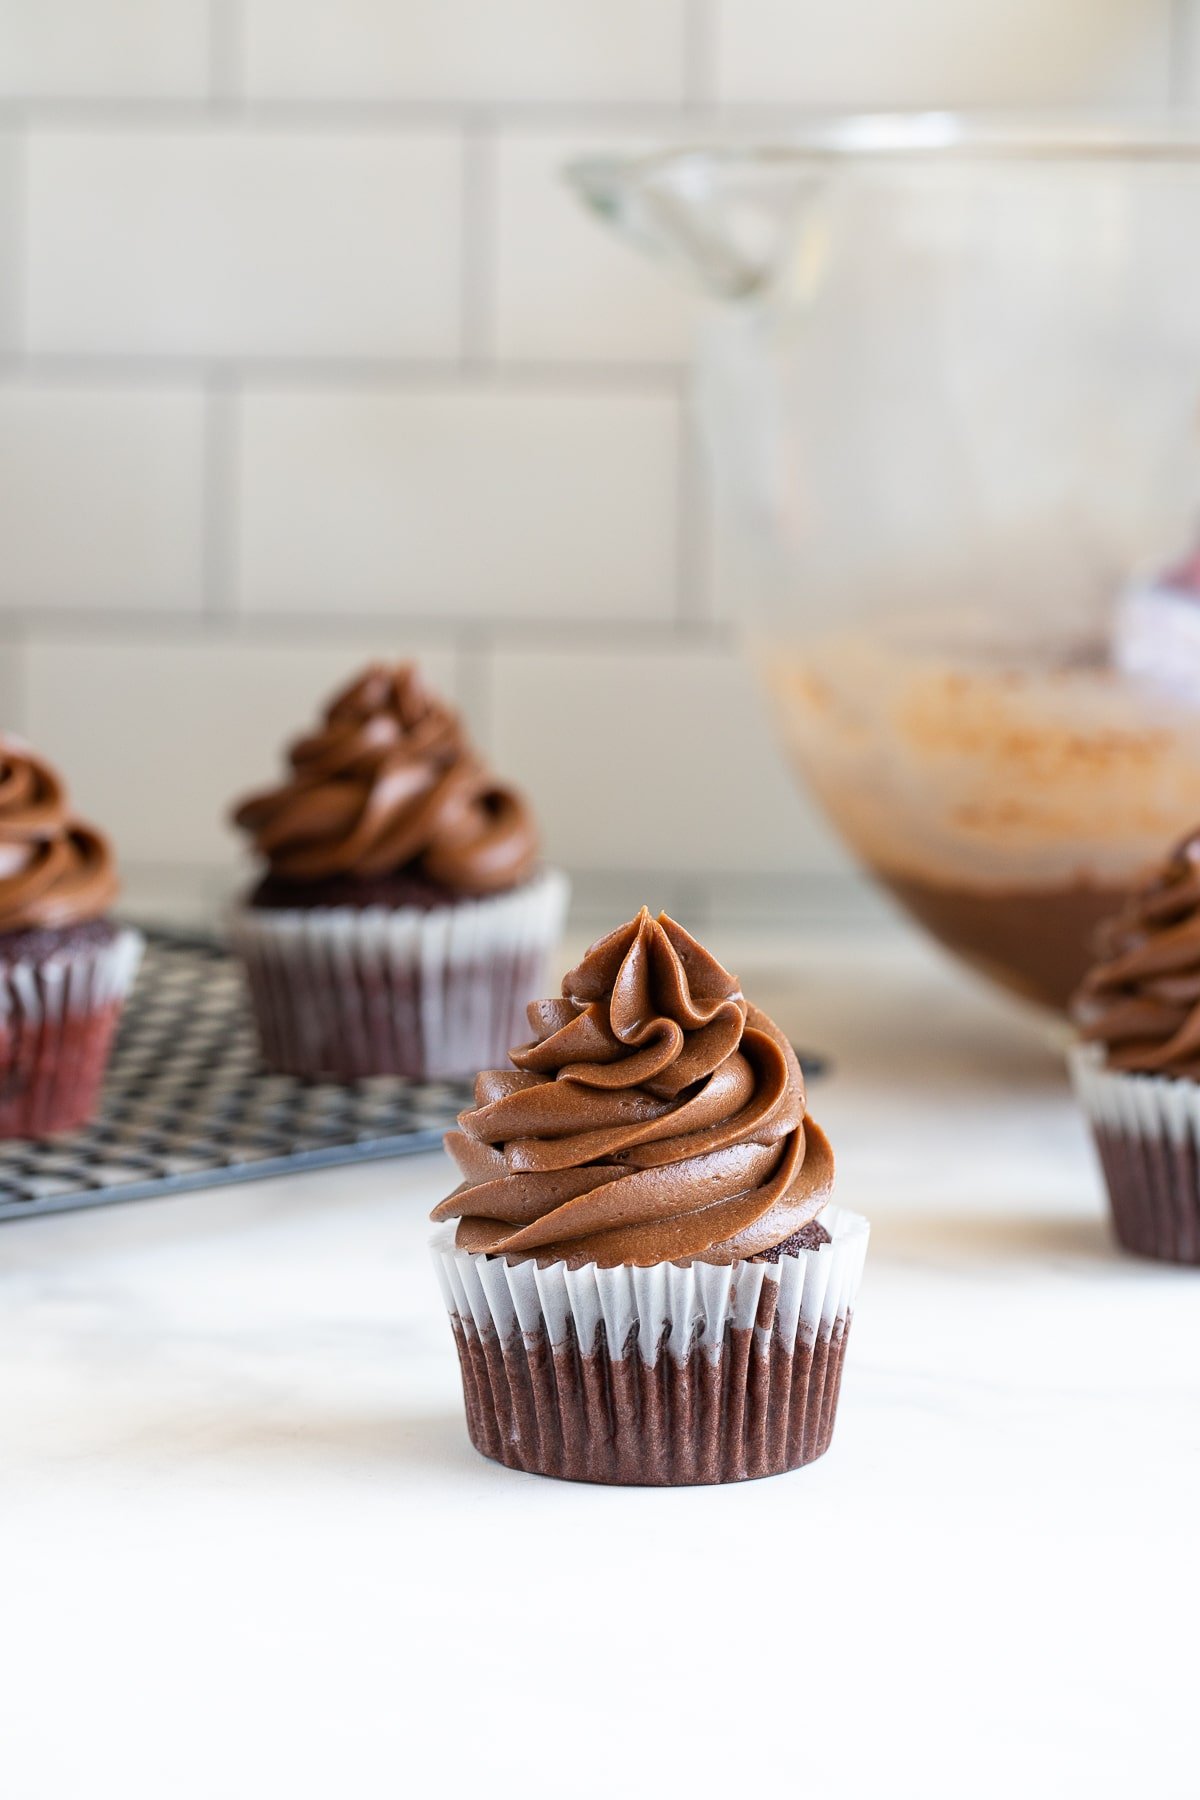 Chocolate Cream Cheese Frosting on cupcake